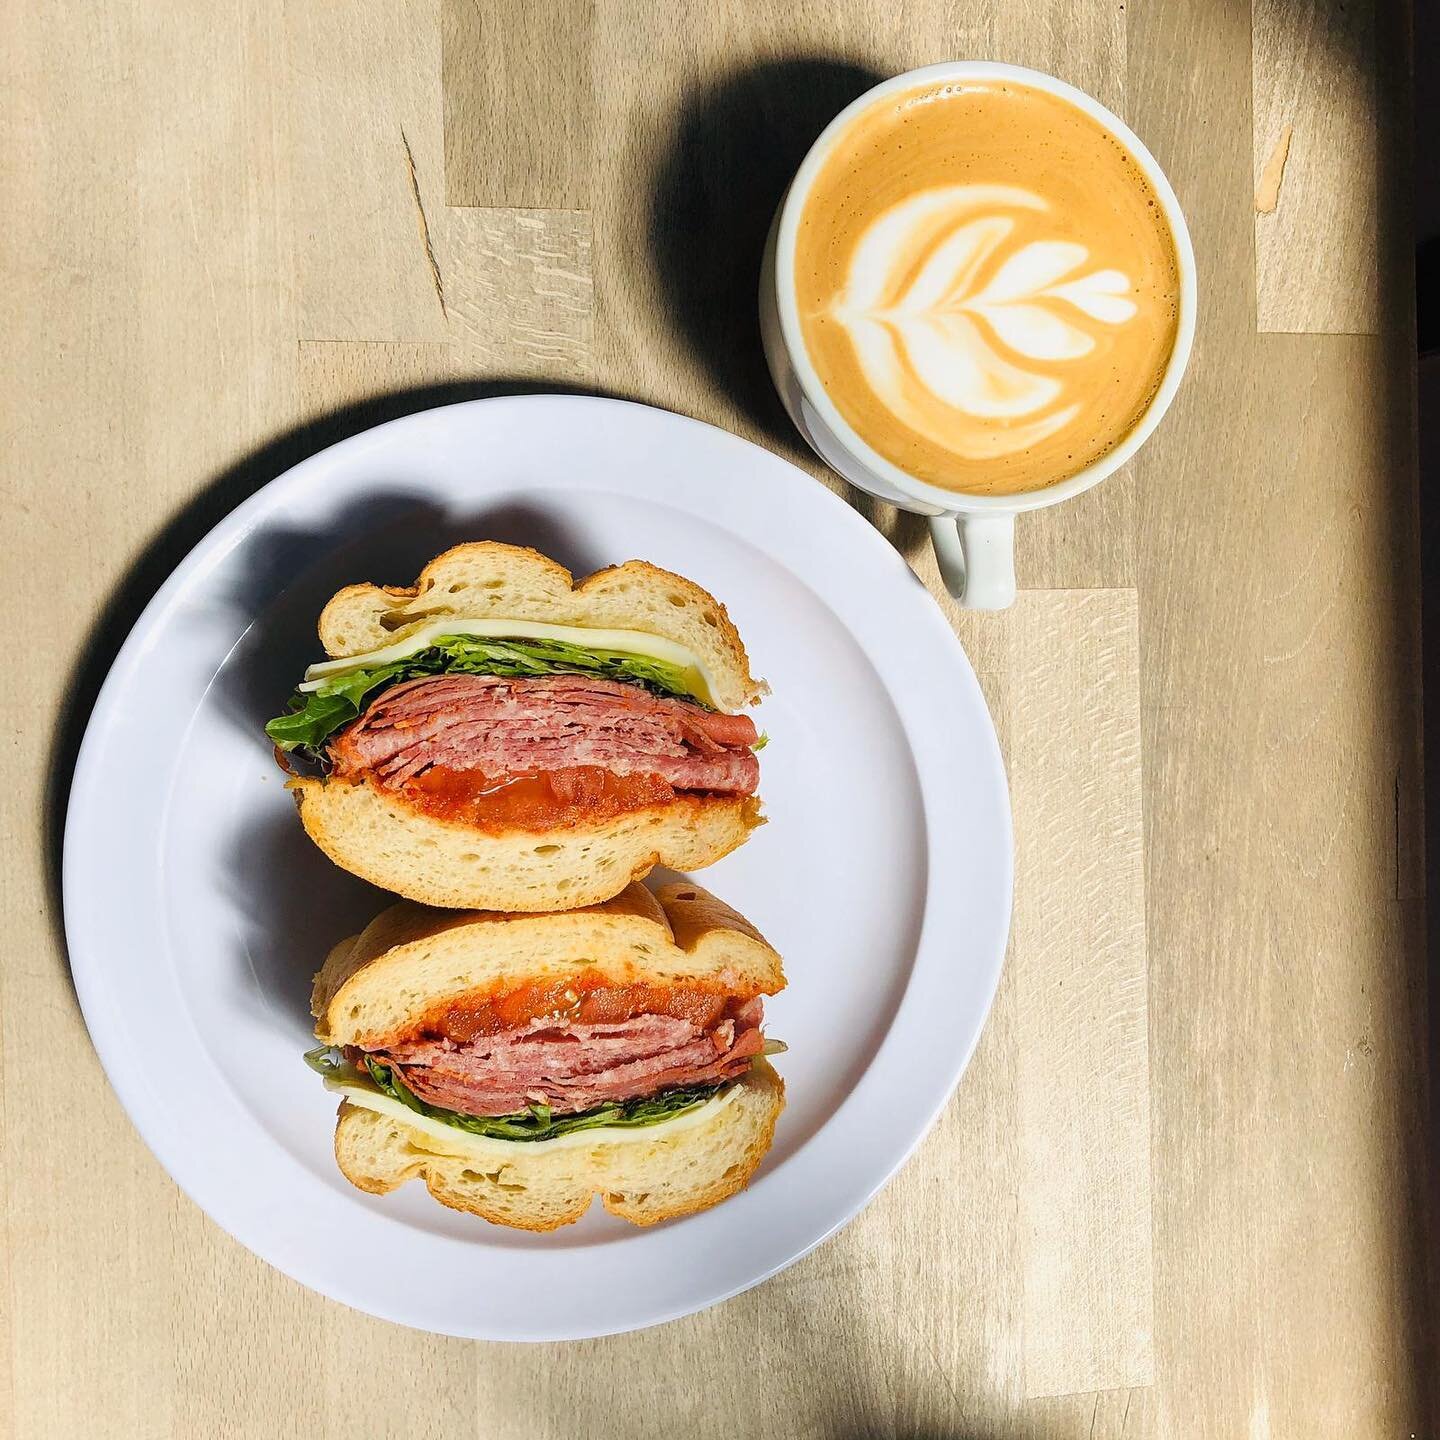 What is your plan for lunch tomorrow? Stop by.. 
.
.
.
#floatcoffeeshop #italiansandwich #latteart #lunchideas #humpdayvibes #laeats #hollywoodlife #pasadenafoodie #pasadenaeats #pasadenaliving #eeeeeats #musthave #coffeetime #coffeeshopvibes #toosma